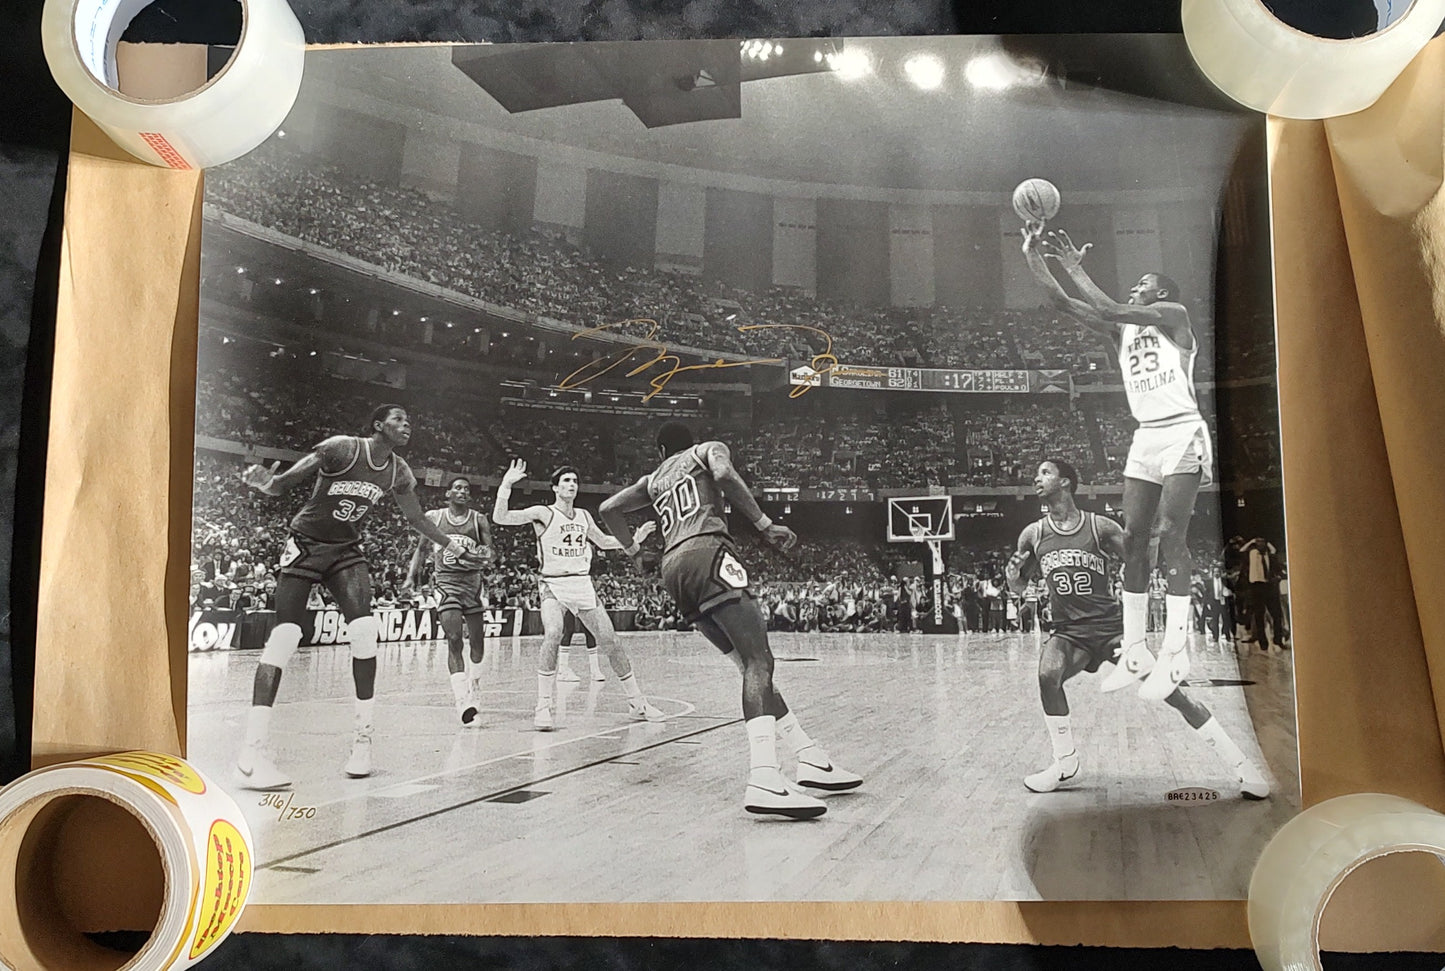 Michael Jordan UDA Upper Deck Authenticated Signed B&W 16x20 17 Second Shot Limited Edition of 750